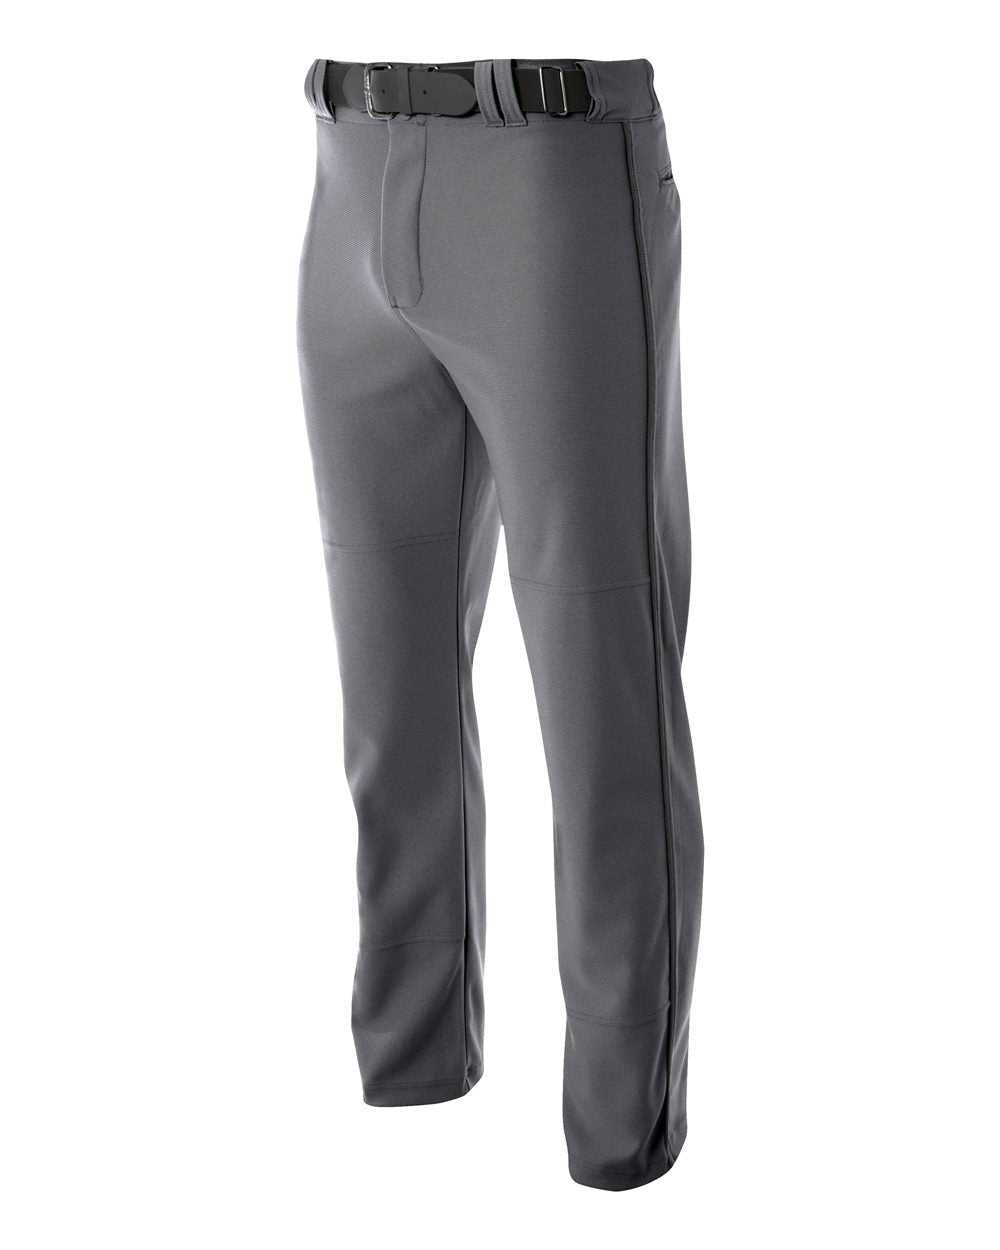 A4 N6162 Pro Style Open Bottom Baggy Cut Baseball Pant - Graphite - HIT a Double